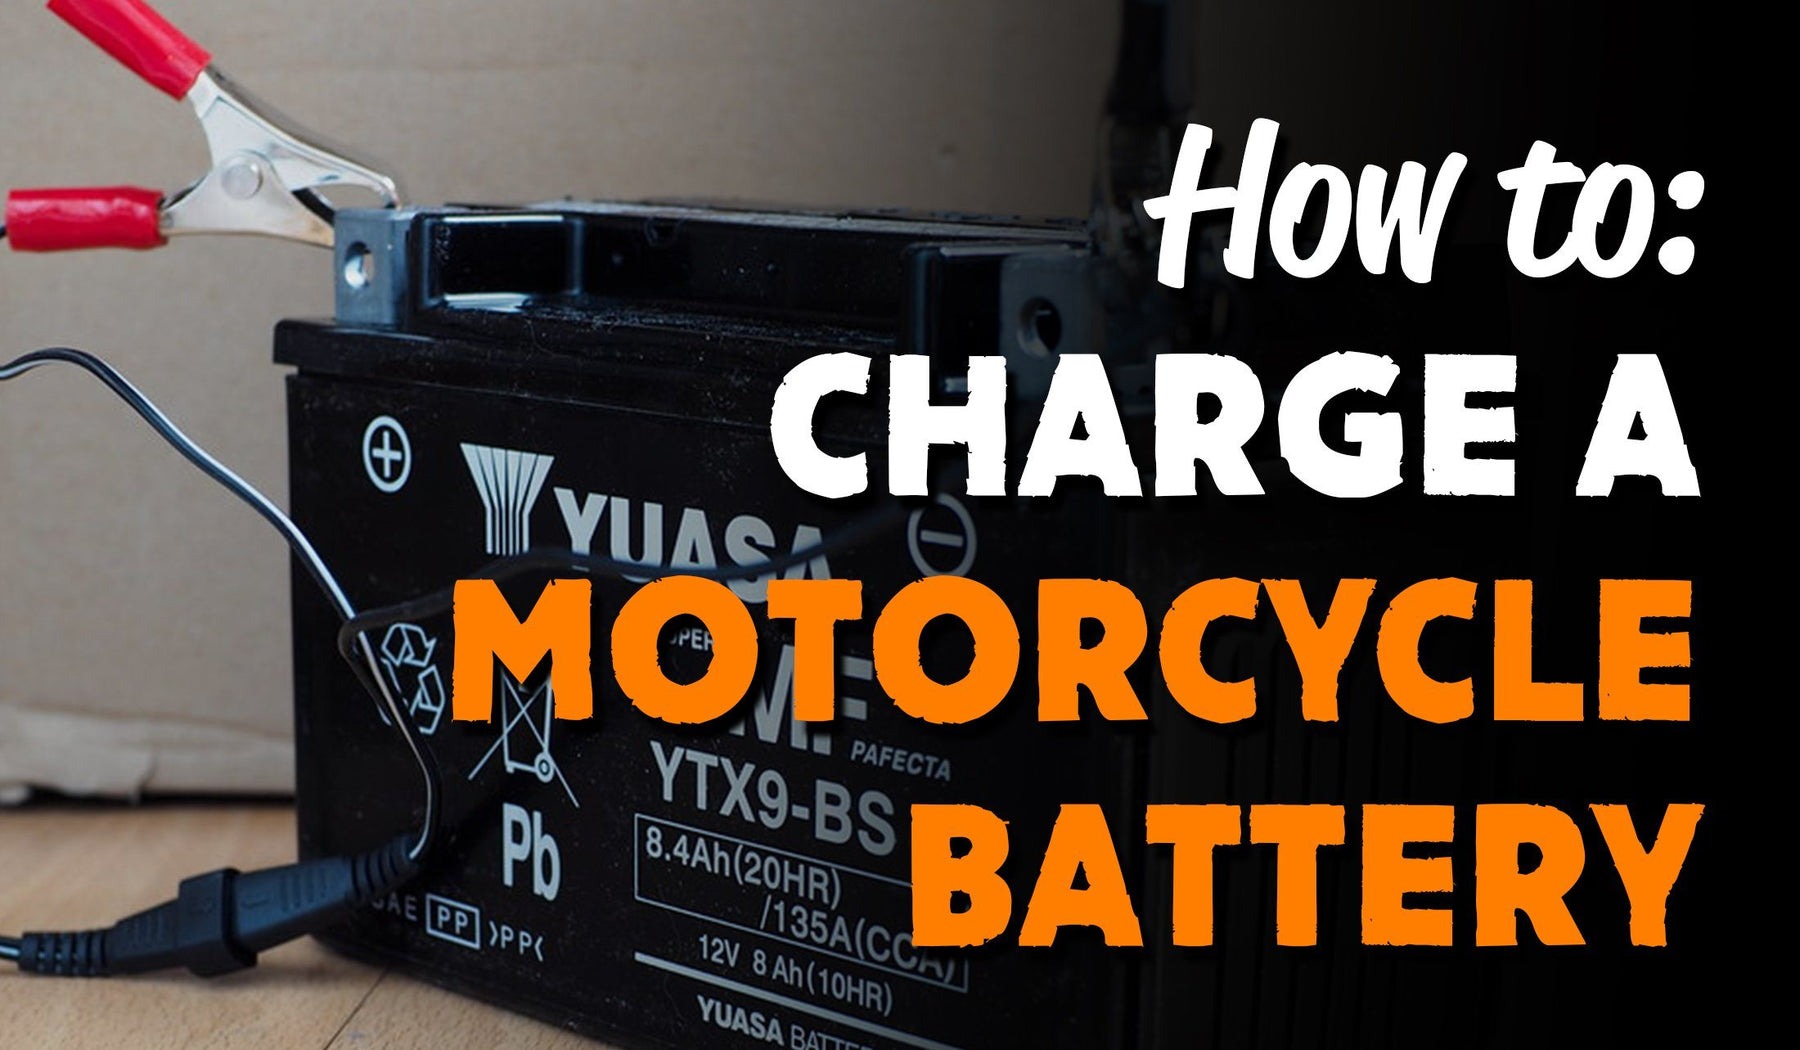 How to Charge a Motorcycle Battery: A Step-by-Step Guide